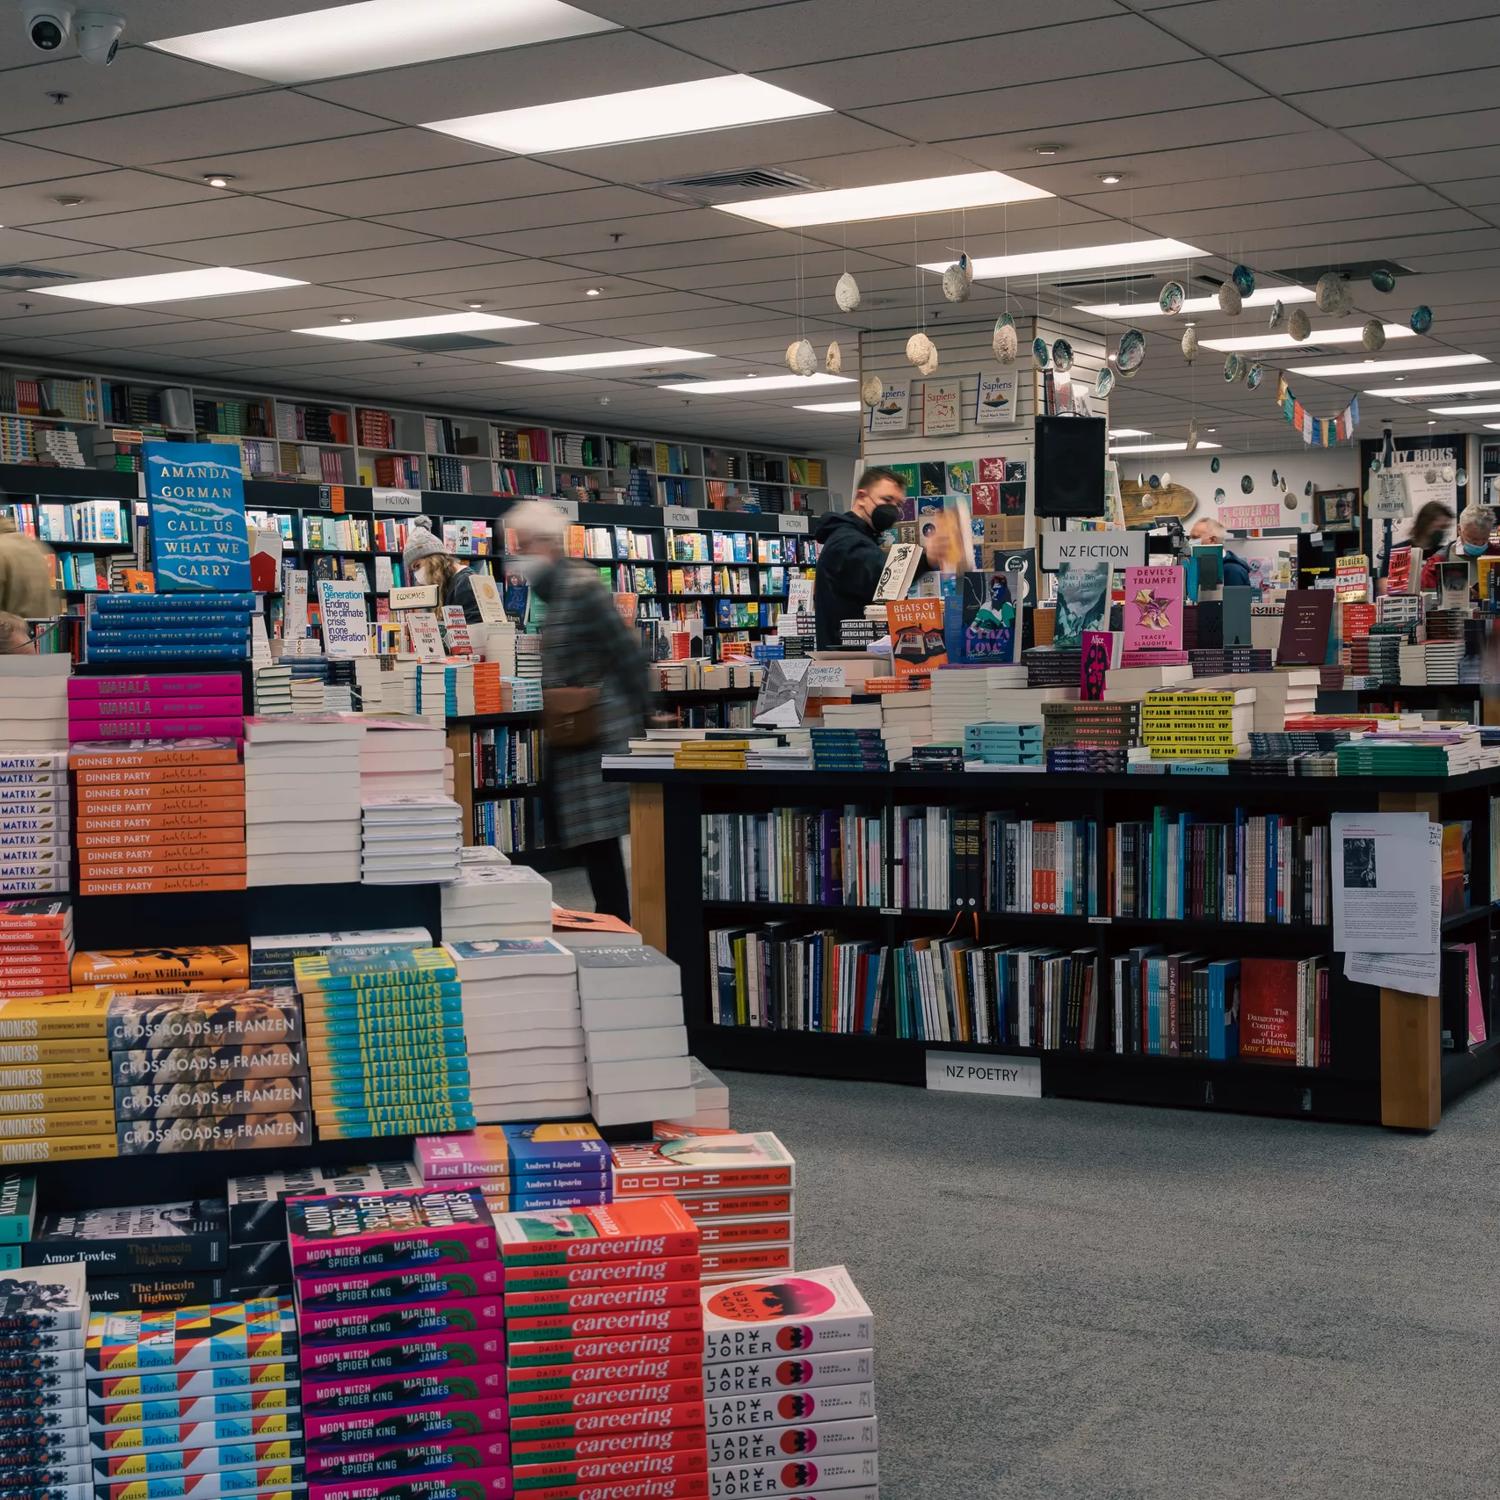 The interior of Unity Books, with shelves and display tables of books.